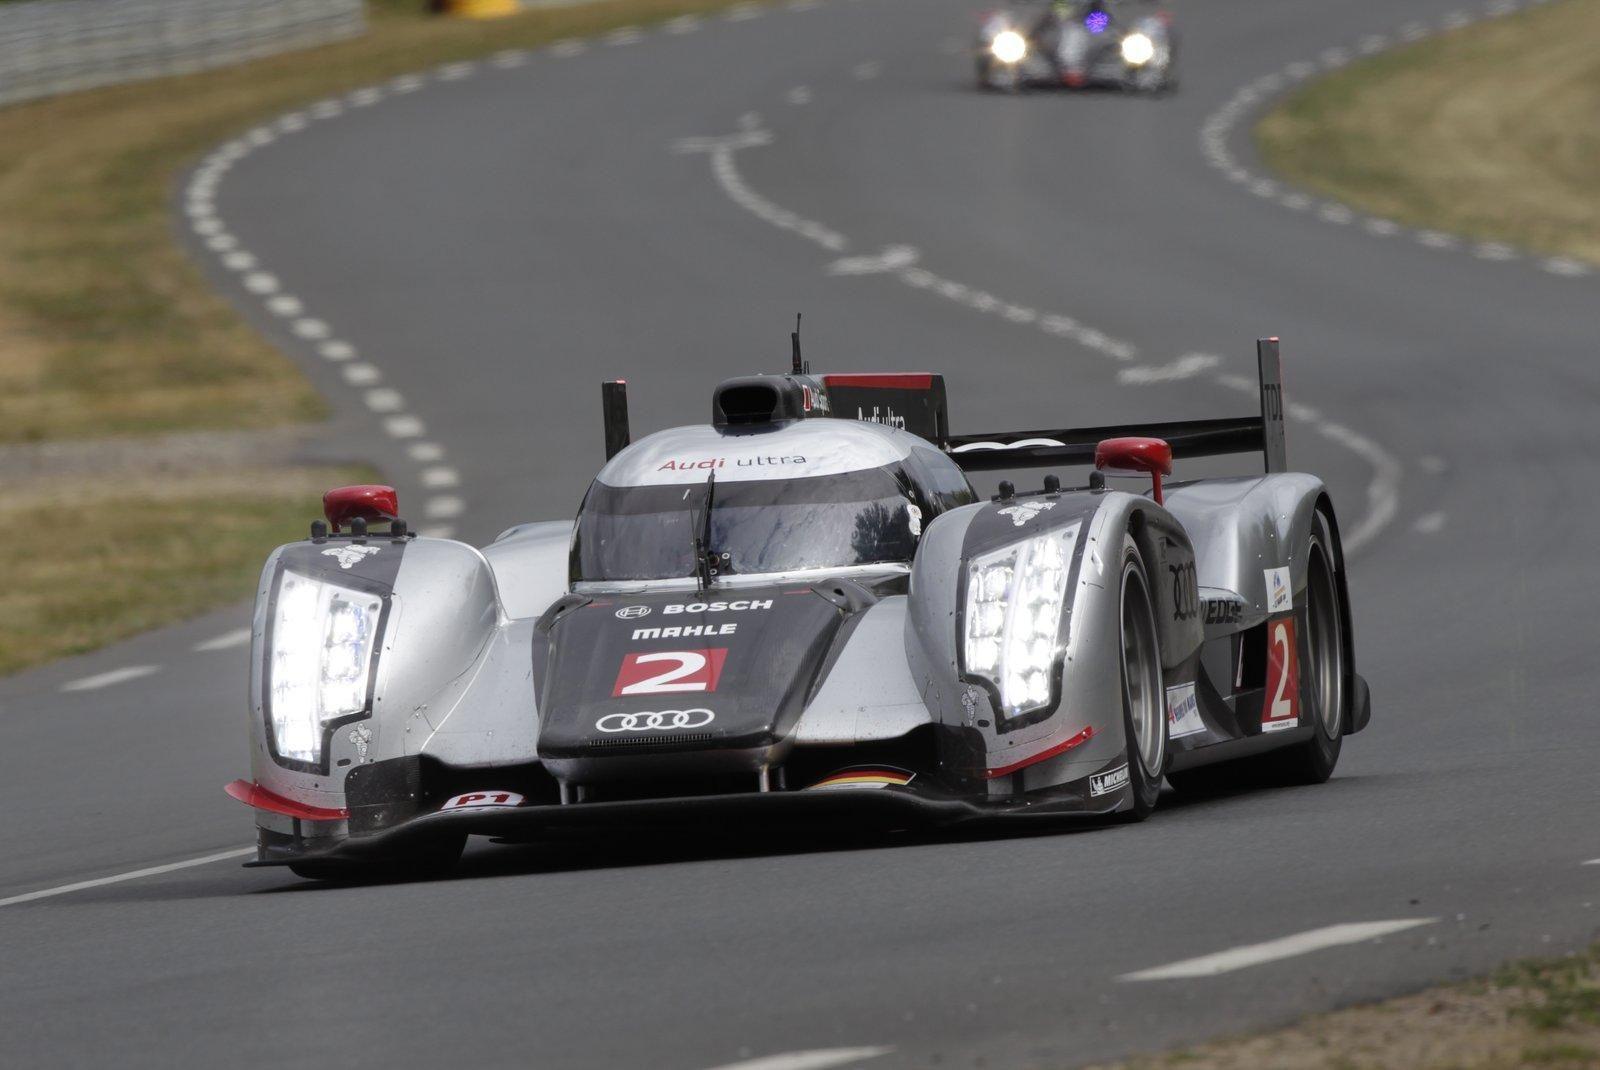 Le Mans 24hours Audi R18 TDI Hybrid 2012 photo 75183 picture at